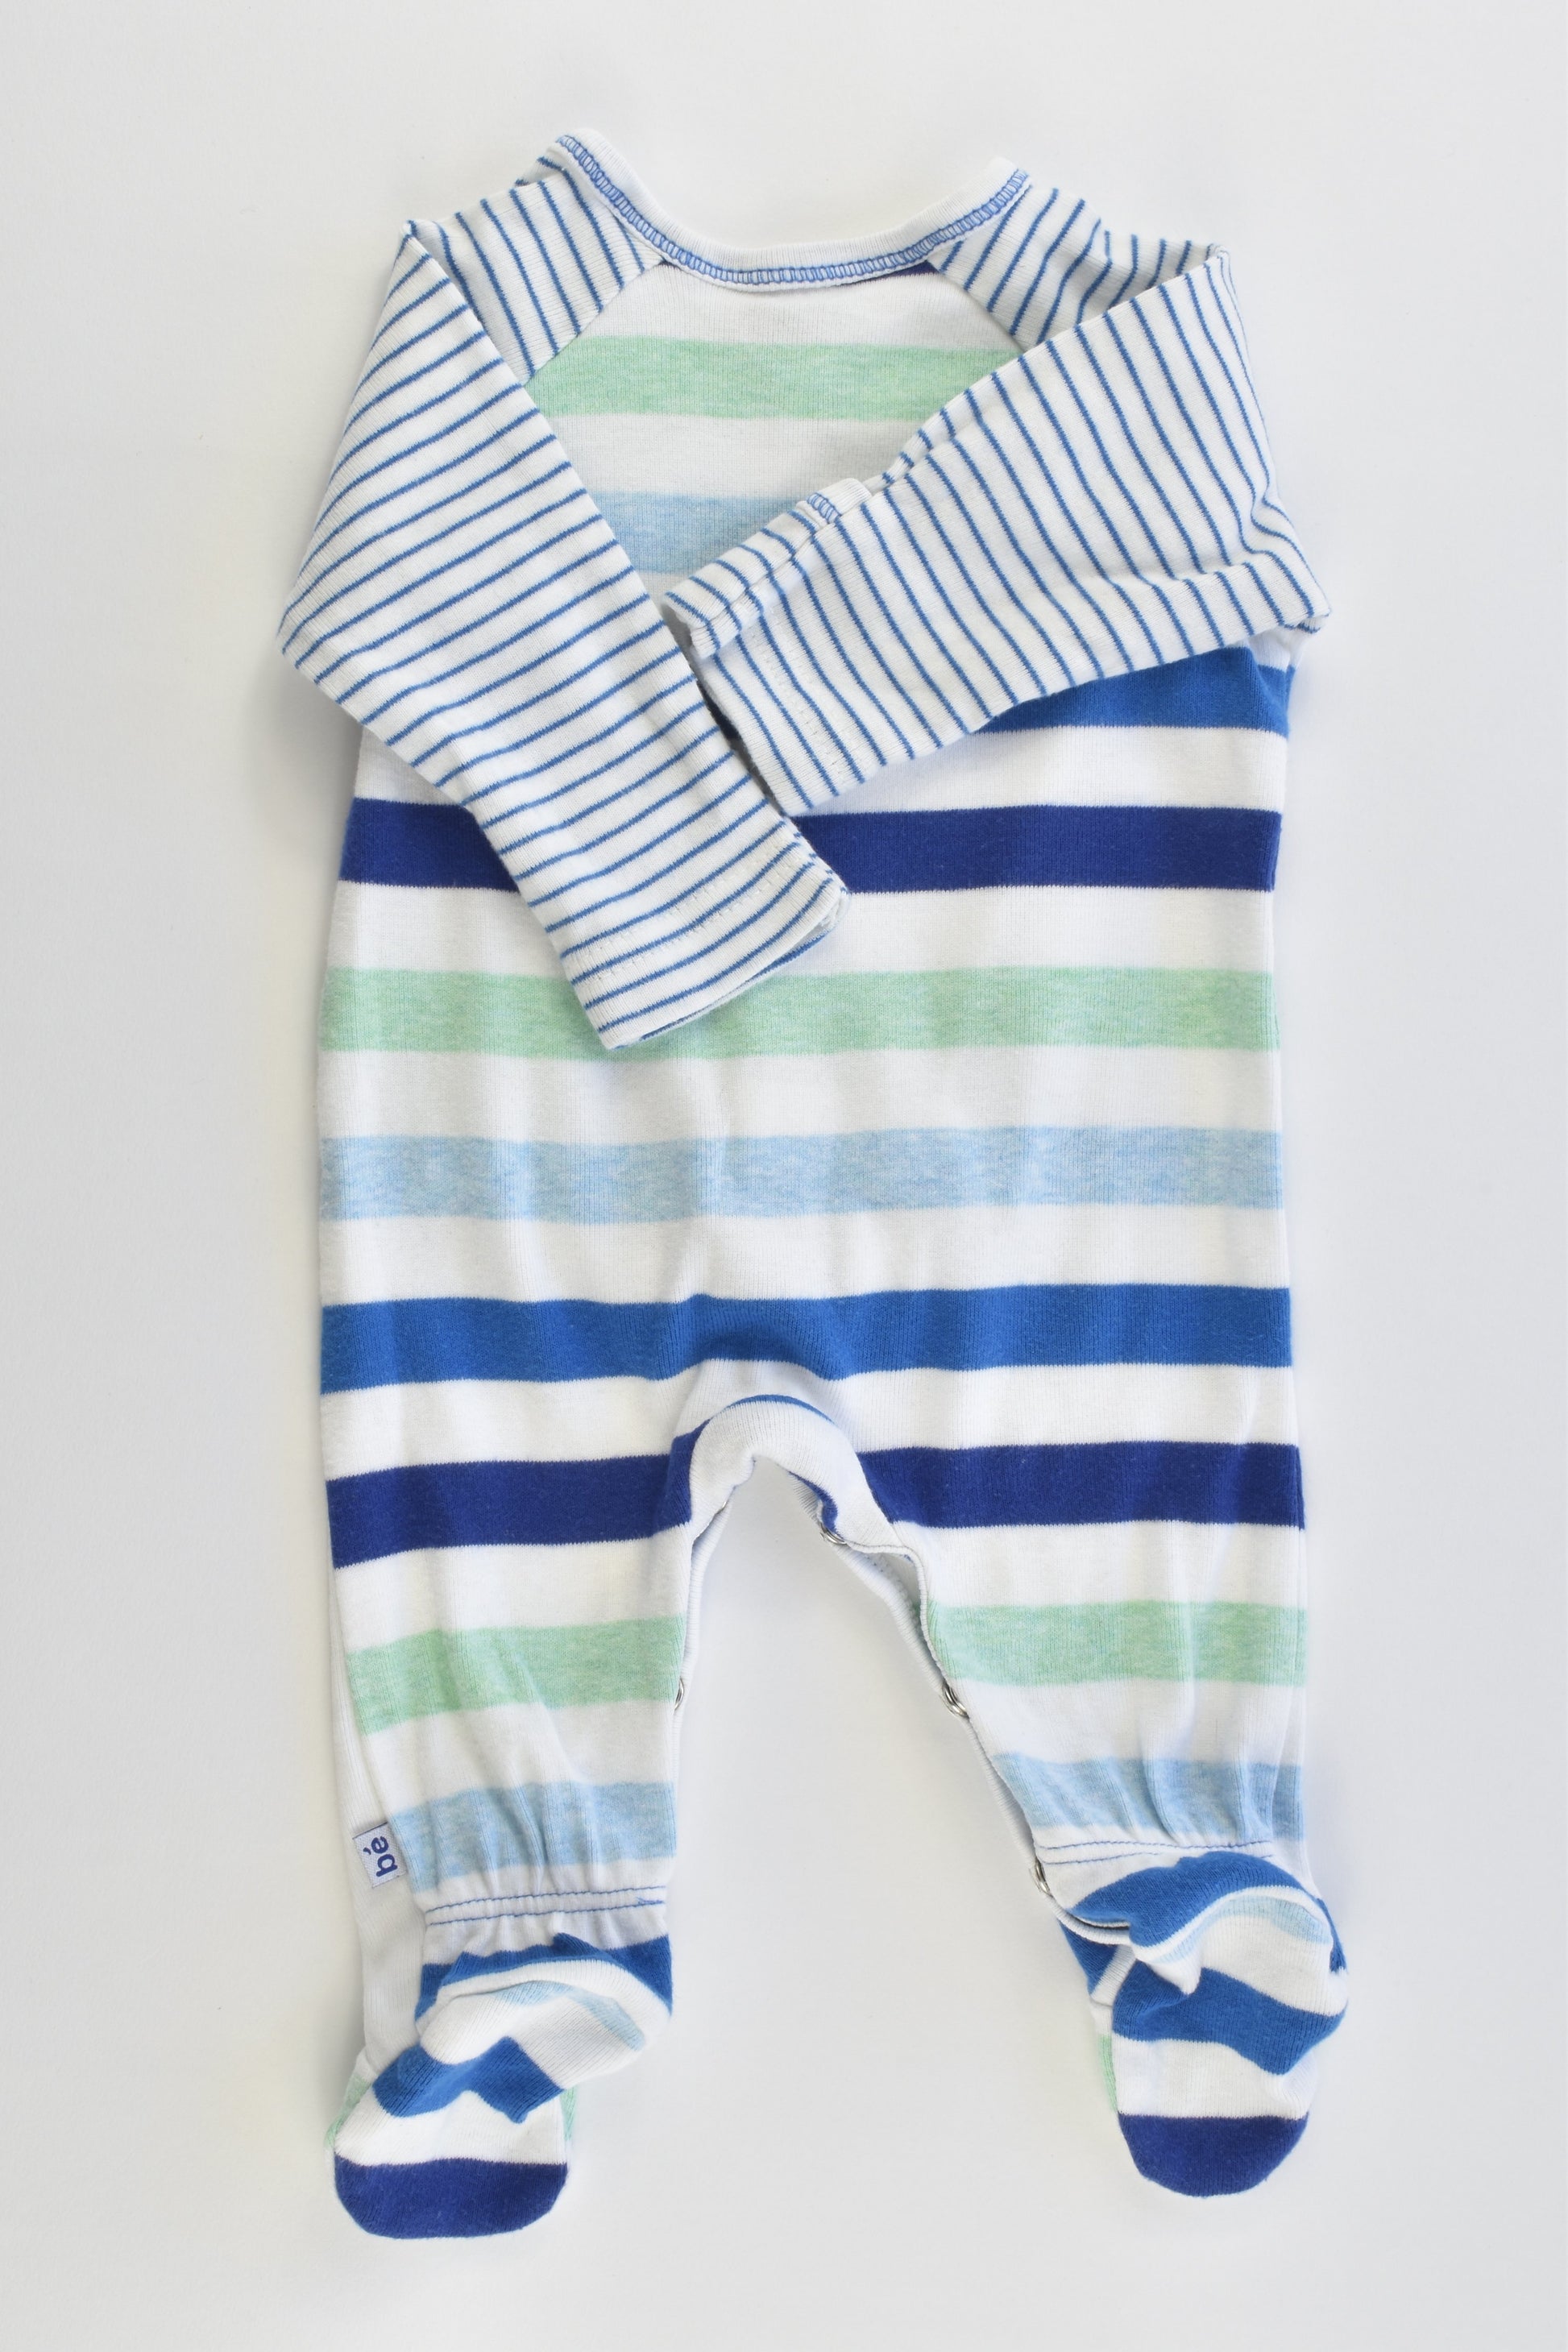 Bébé by Minihaha Size 0000 Sailboat Footed Romper